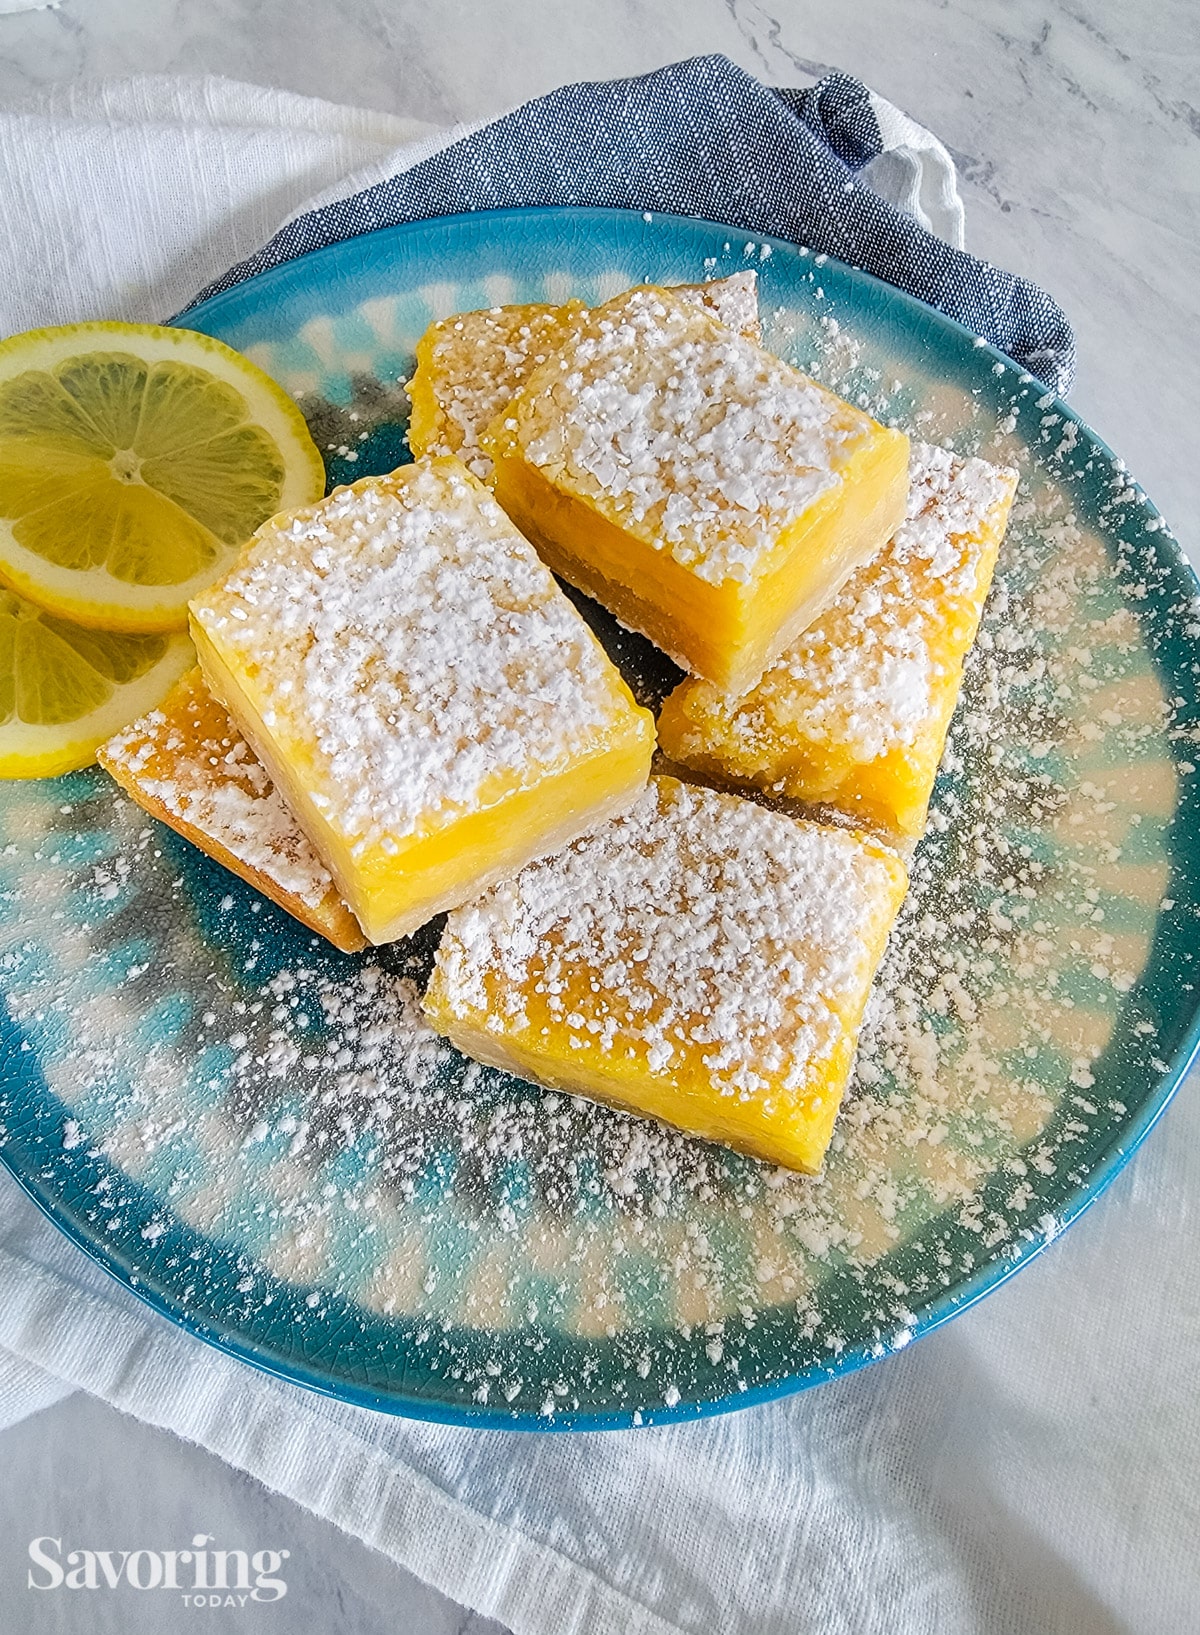 Lemon bars on a blue plate with powdered sugar on top